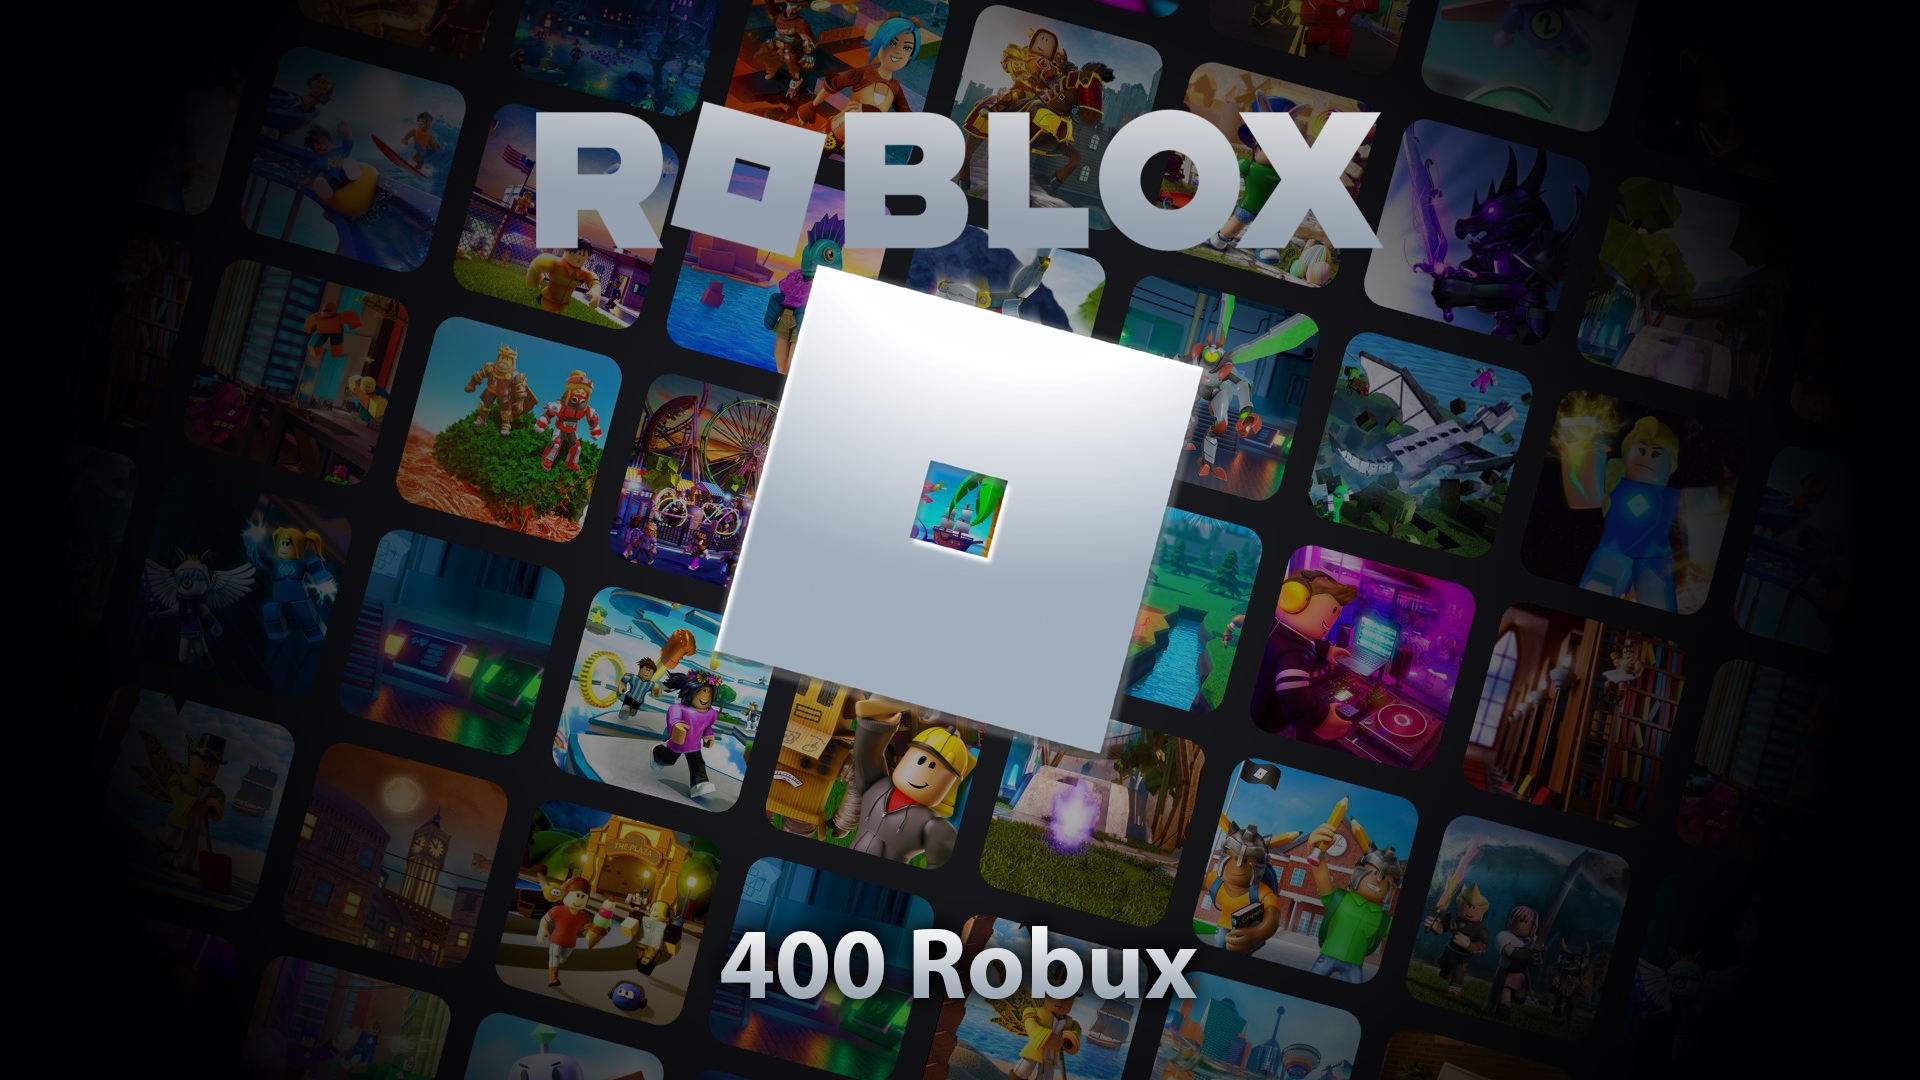 ALL 3 NEW ROBLOX PROMO CODE ON ROBLOX 2021!